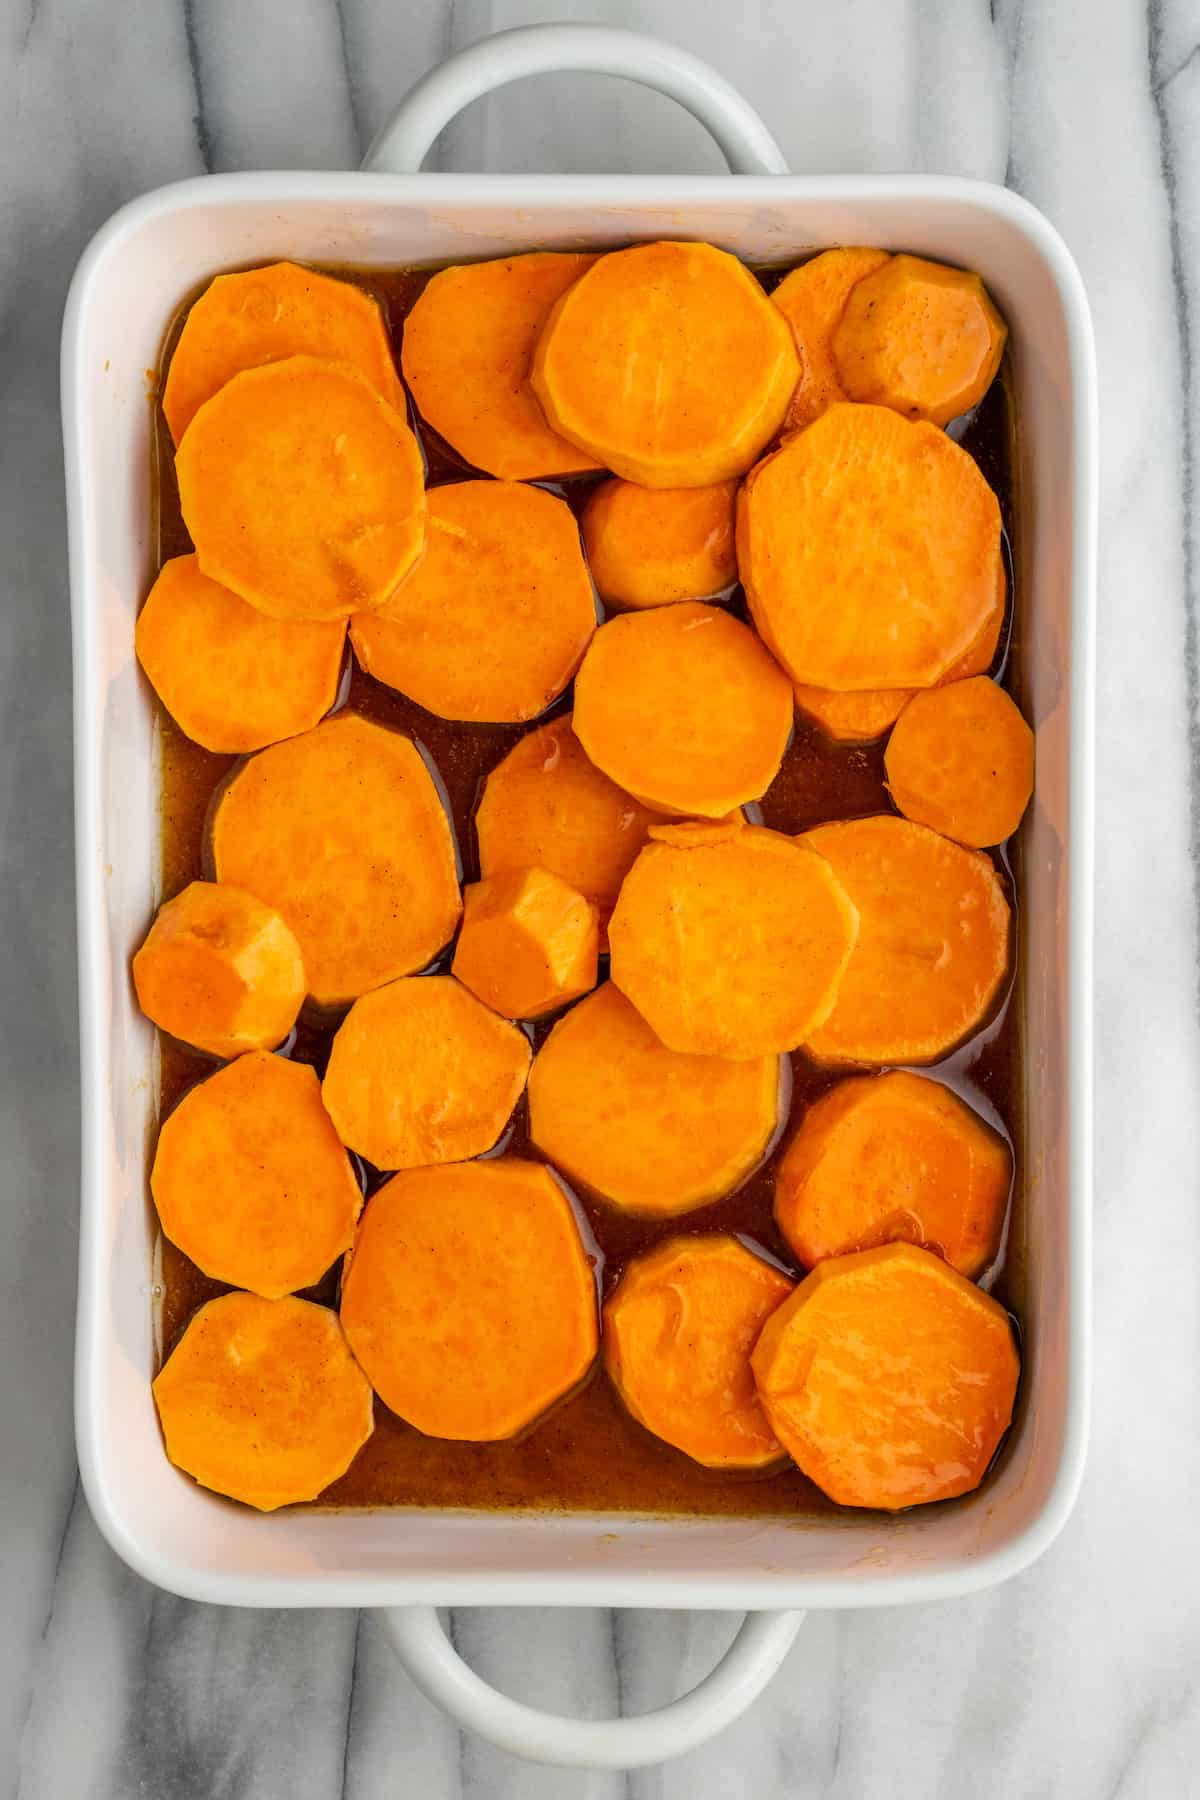 Uncooked yams in a baking tray